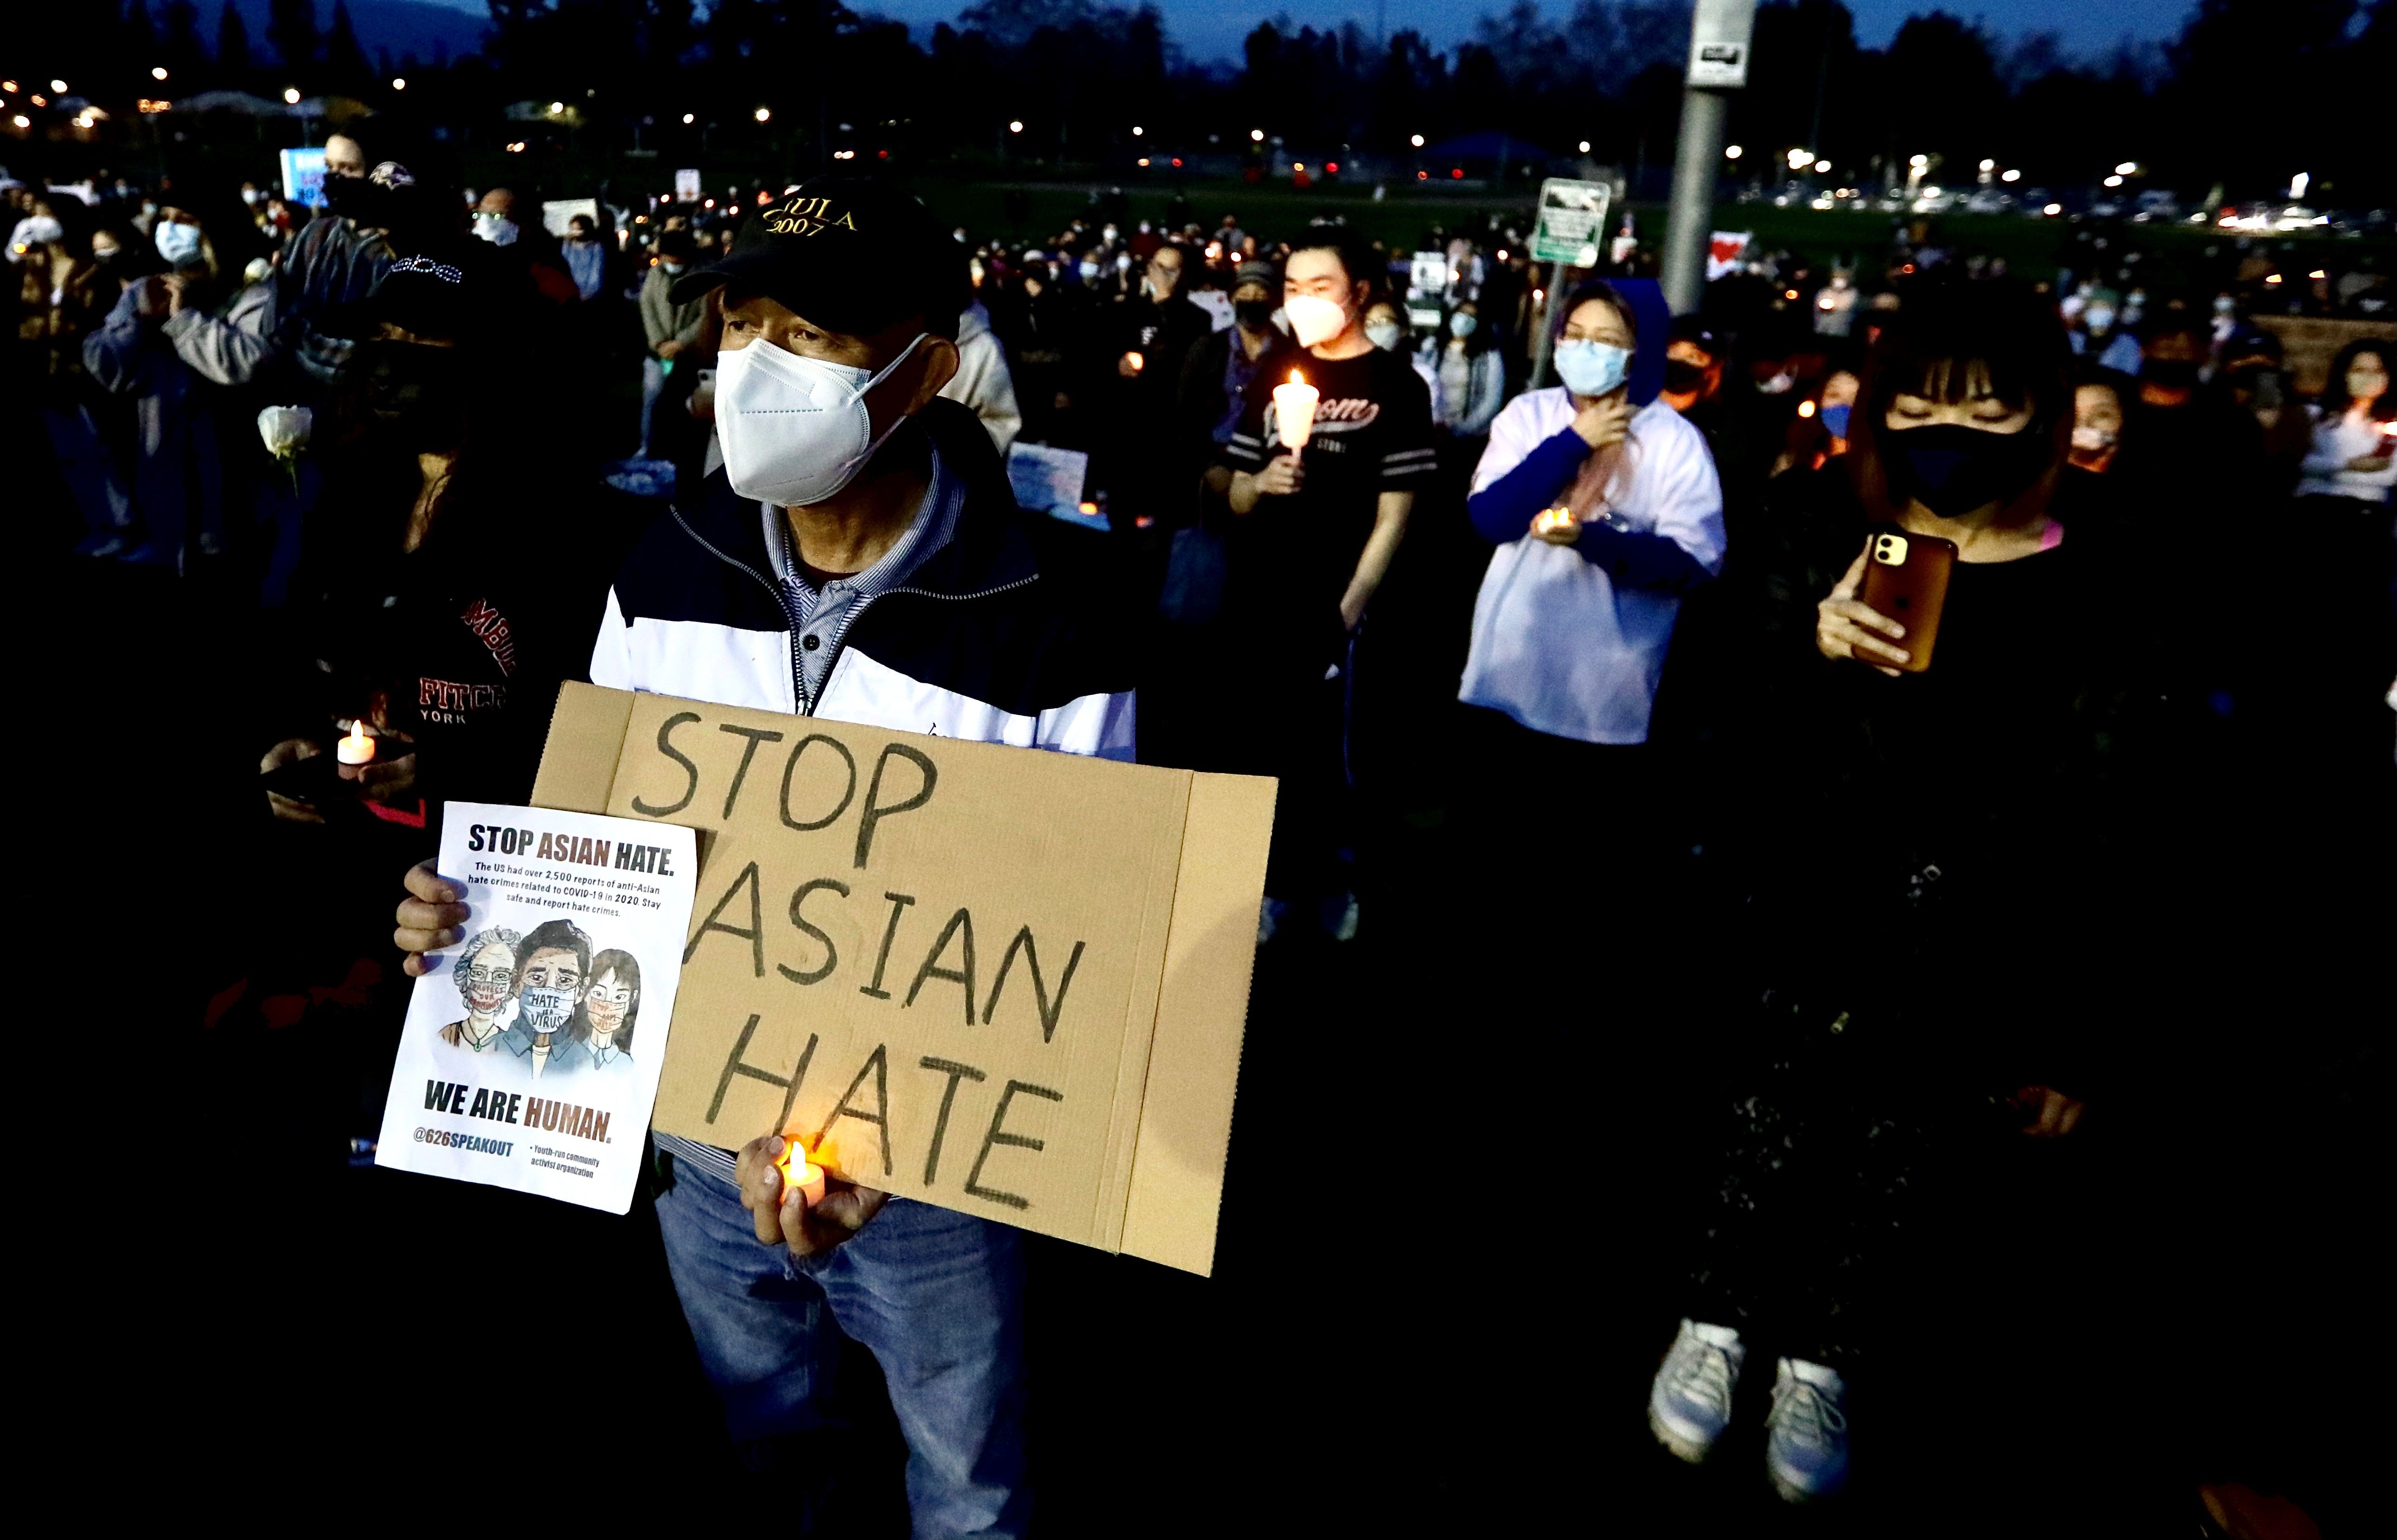 People attend a "Stop Asian Hate" candlelight vigil in a city park of Alhambra, Los Angeles County, California